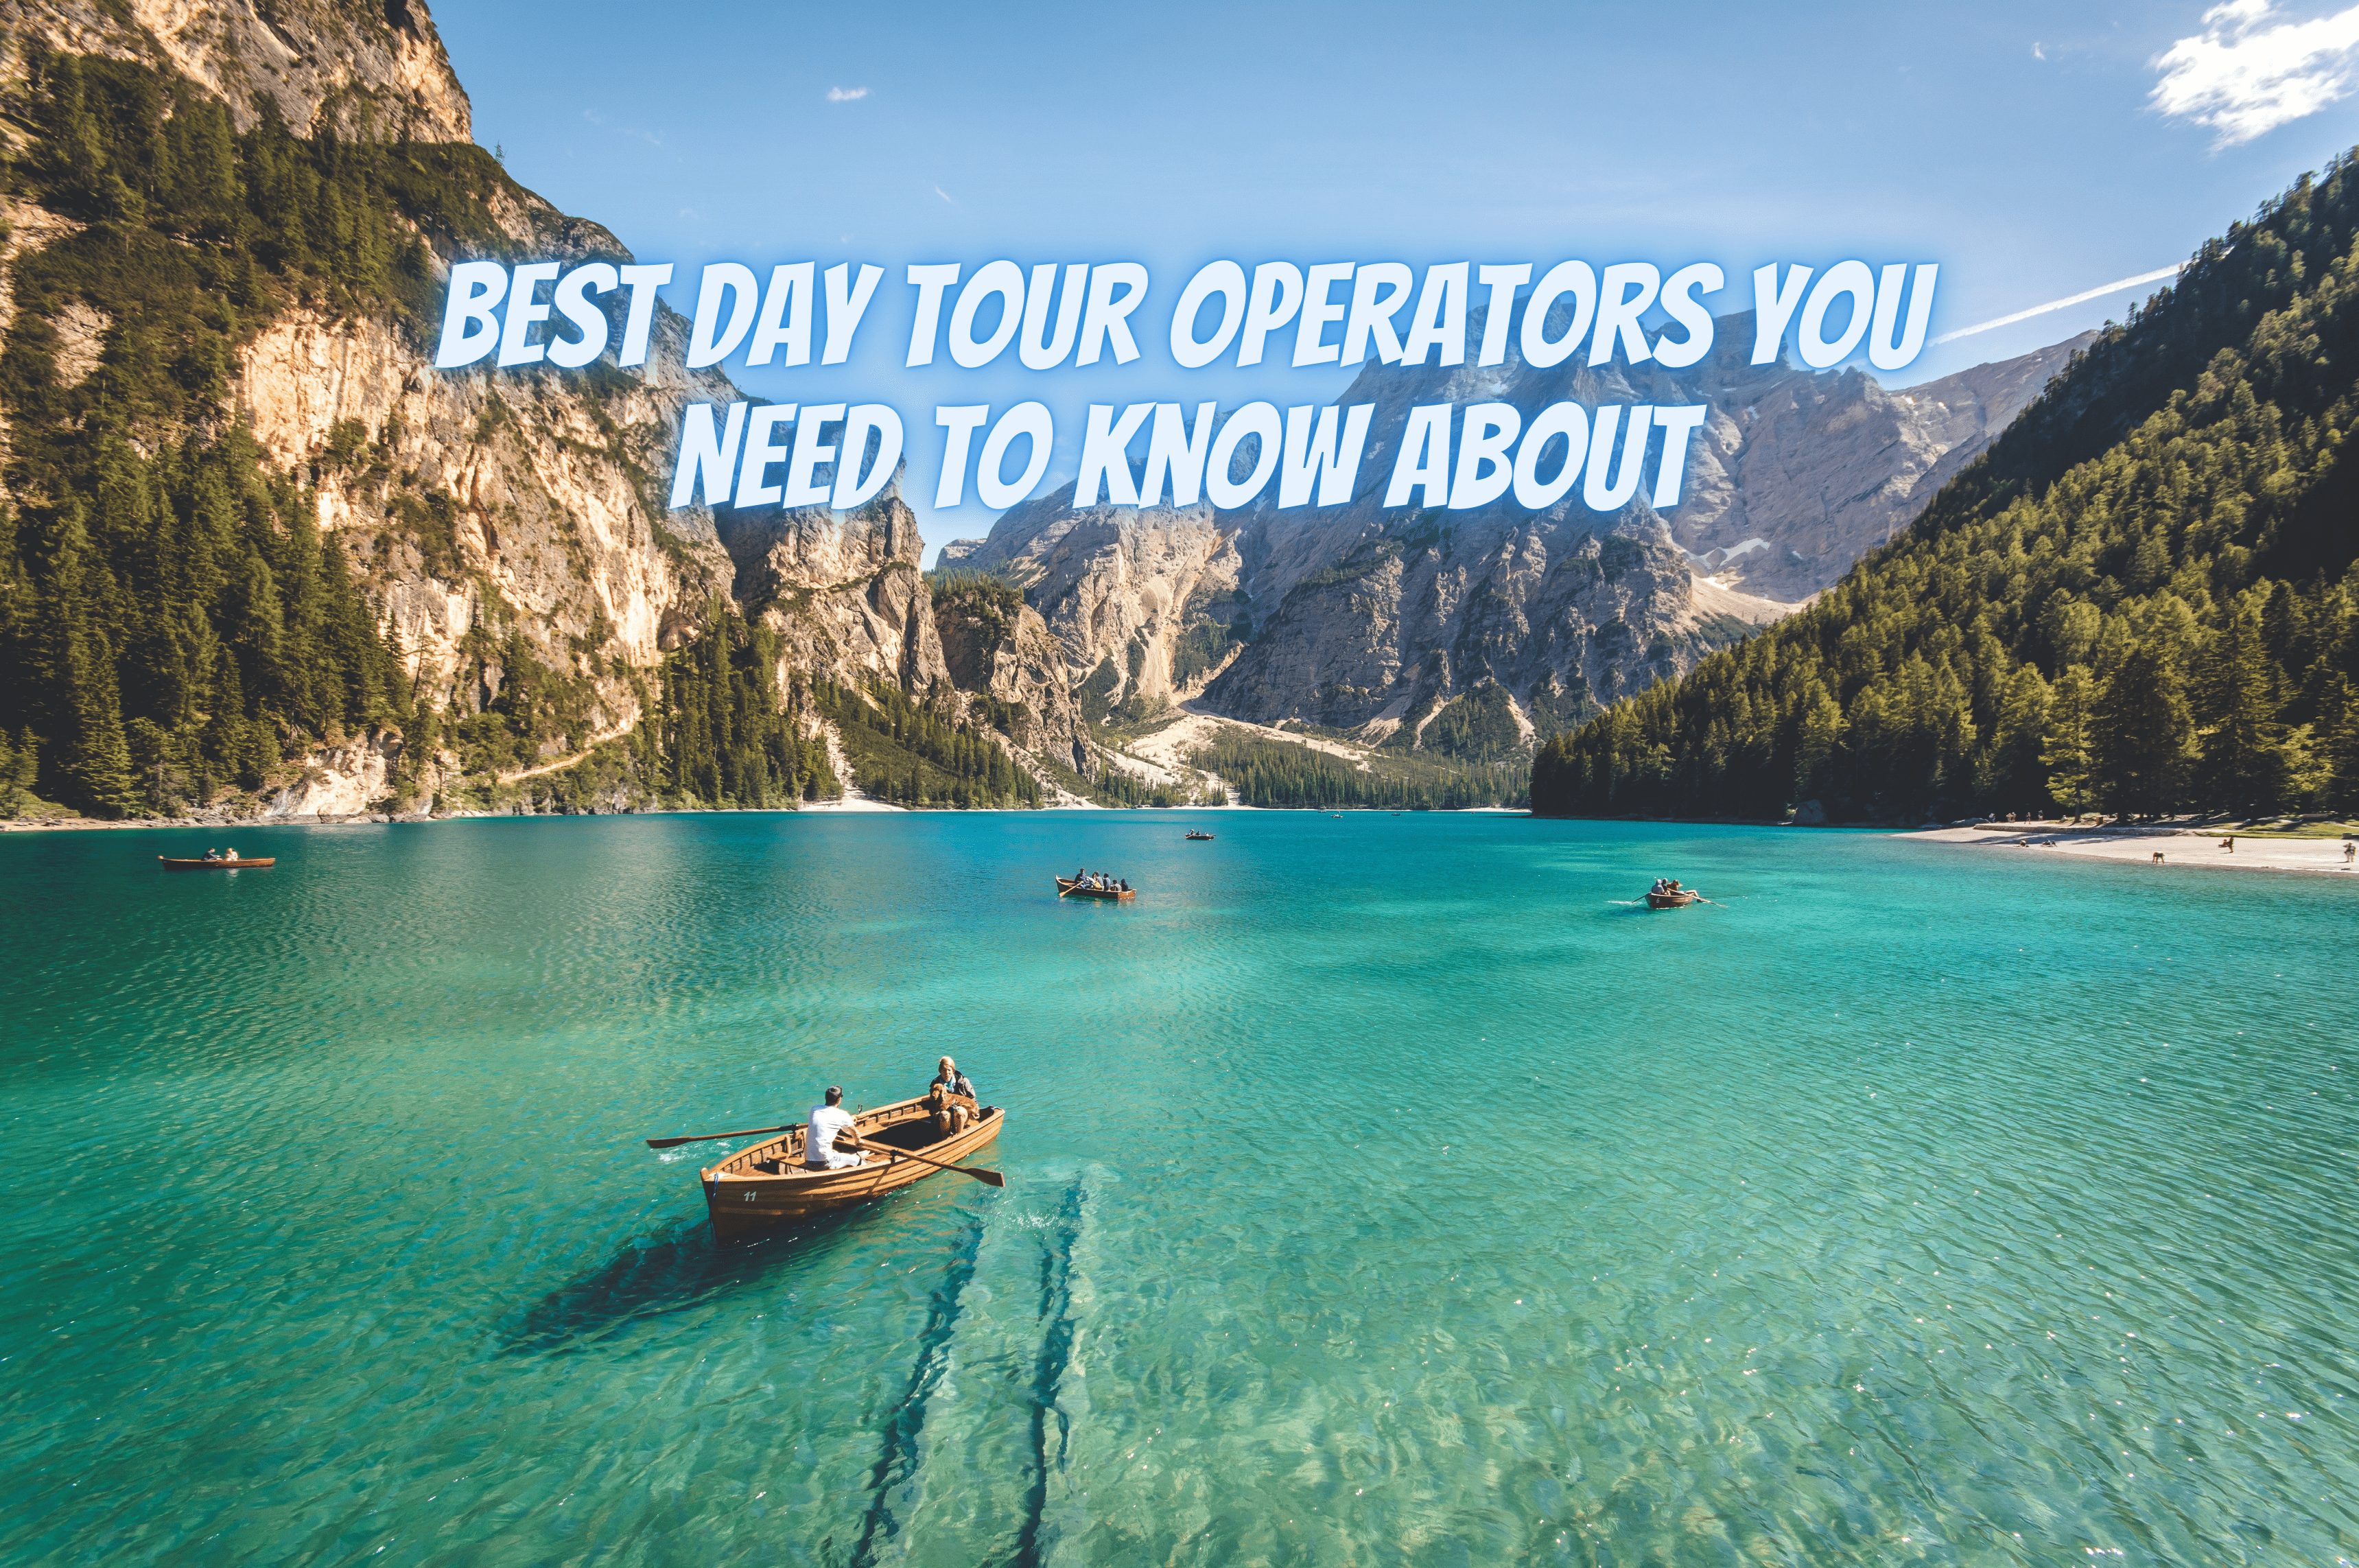 Best Day Tour Operators You Need to Know About